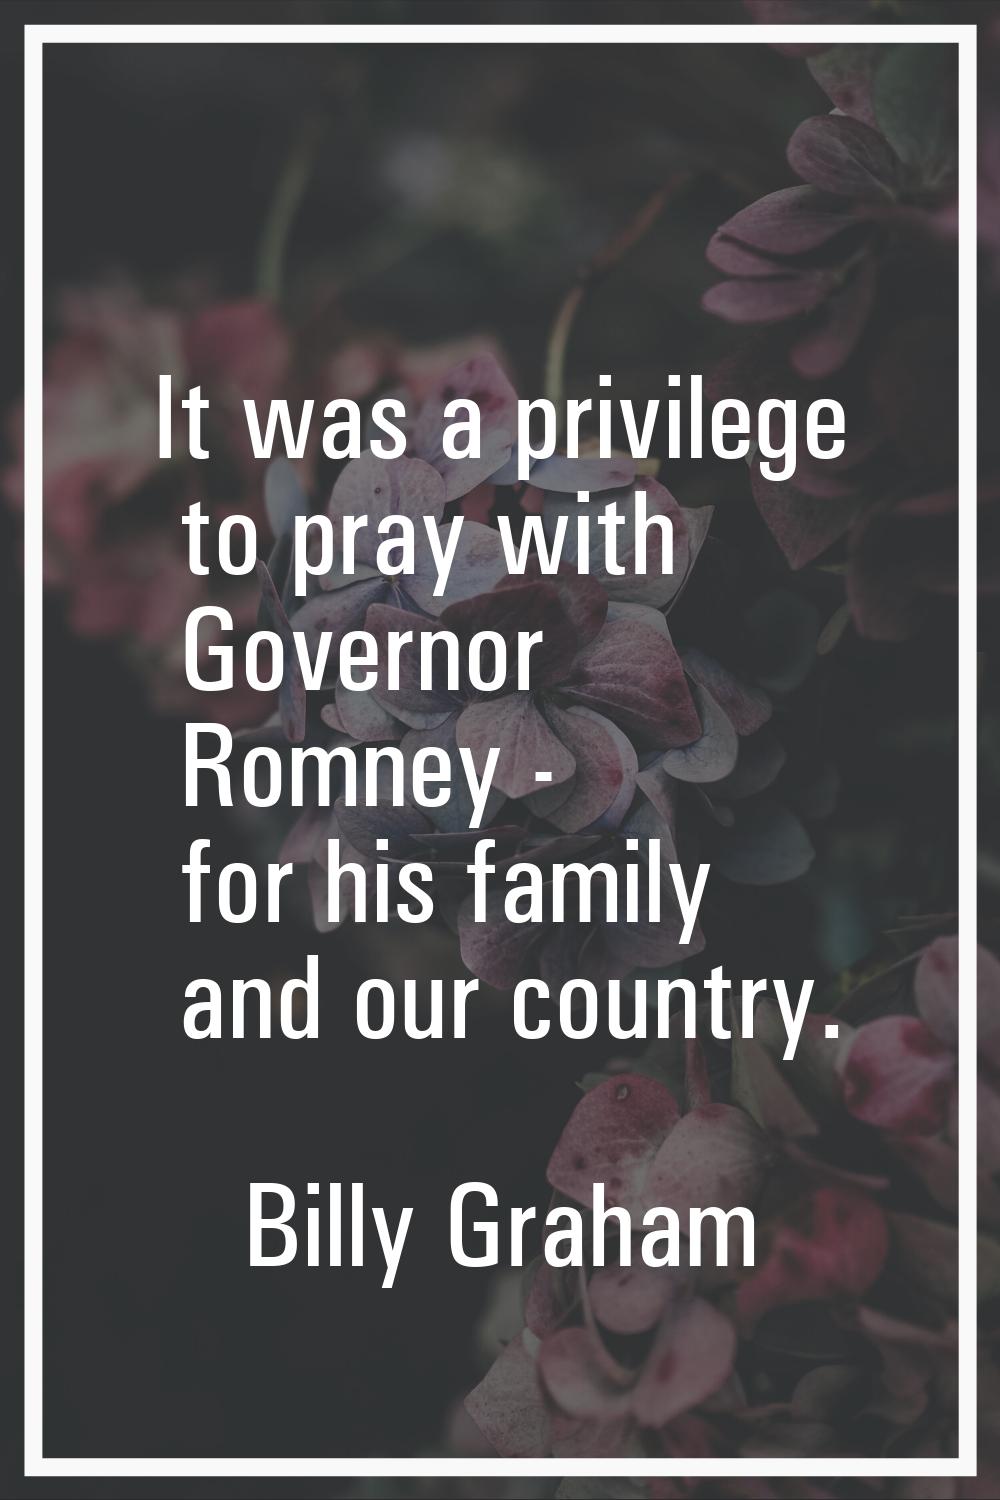 It was a privilege to pray with Governor Romney - for his family and our country.